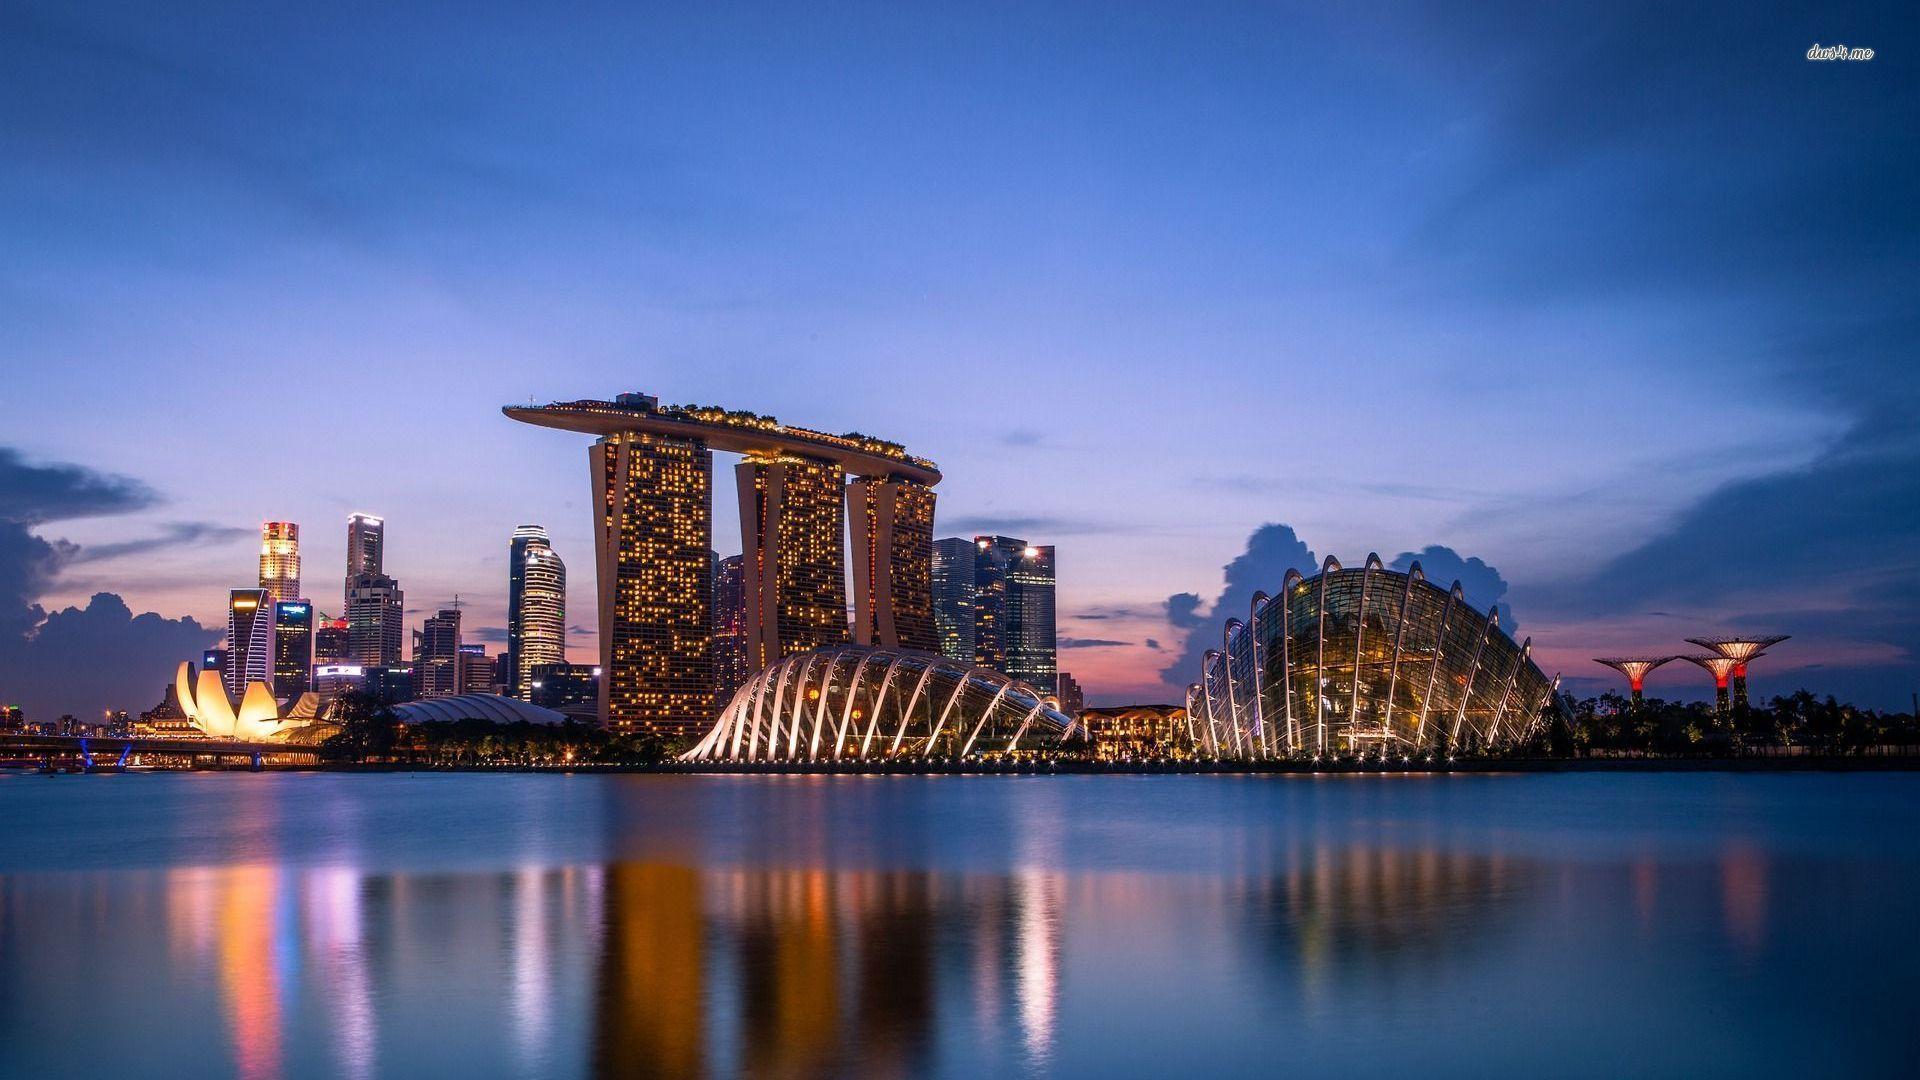 Of the city of Singapore Wallpapers HD, 2K Desk 4K Wallpapers